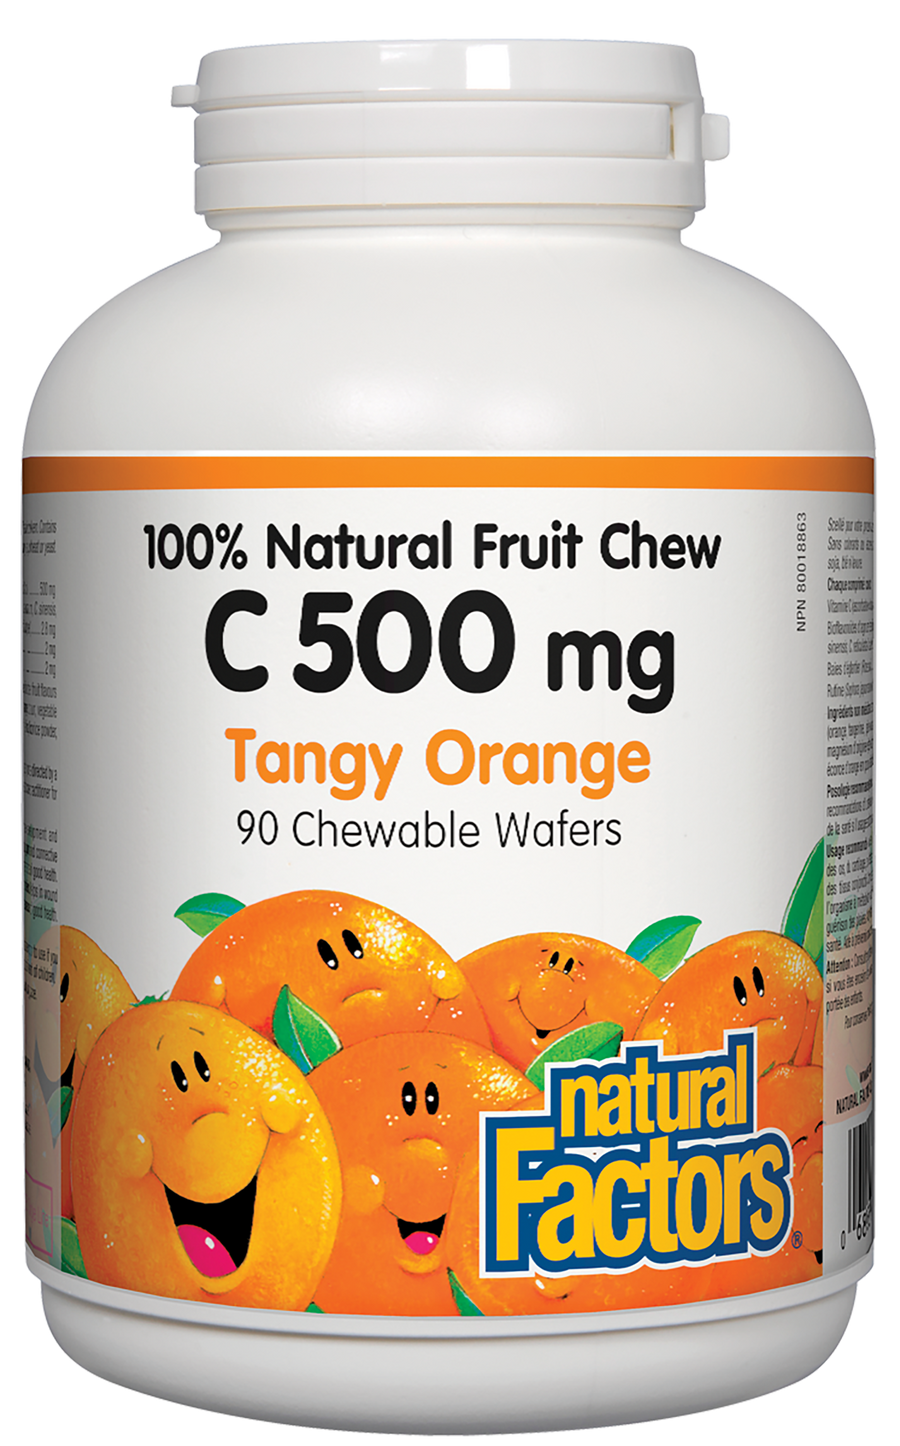 Natural Factors C 500mg 100% Natural Fruit Chew Tangy Orange Chewable Wafers